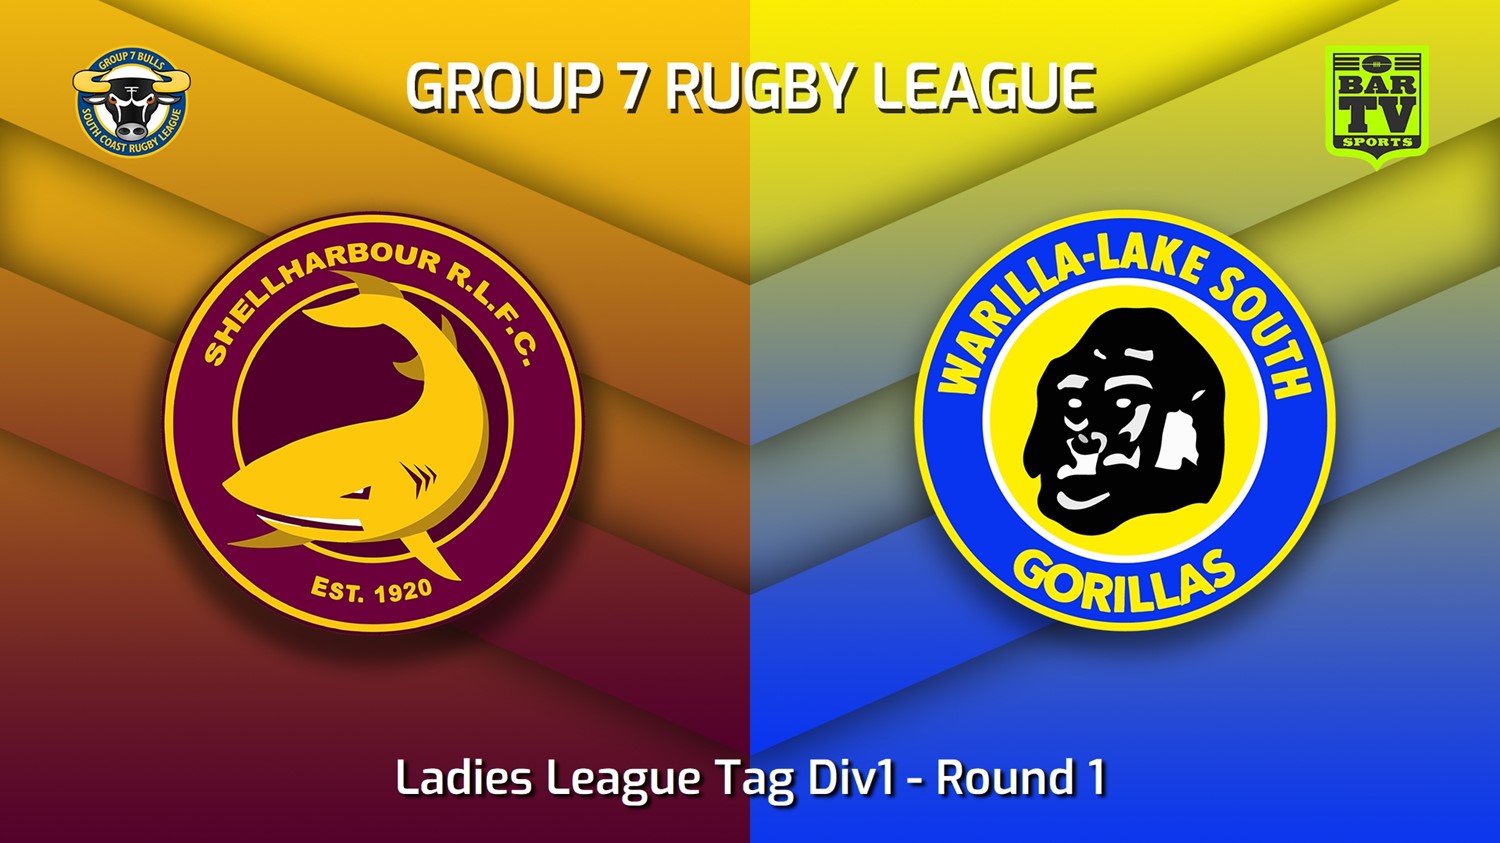 230326-South Coast Round 1 - Ladies League Tag Div1 - Shellharbour Sharks v Warilla-Lake South Gorillas Minigame Slate Image